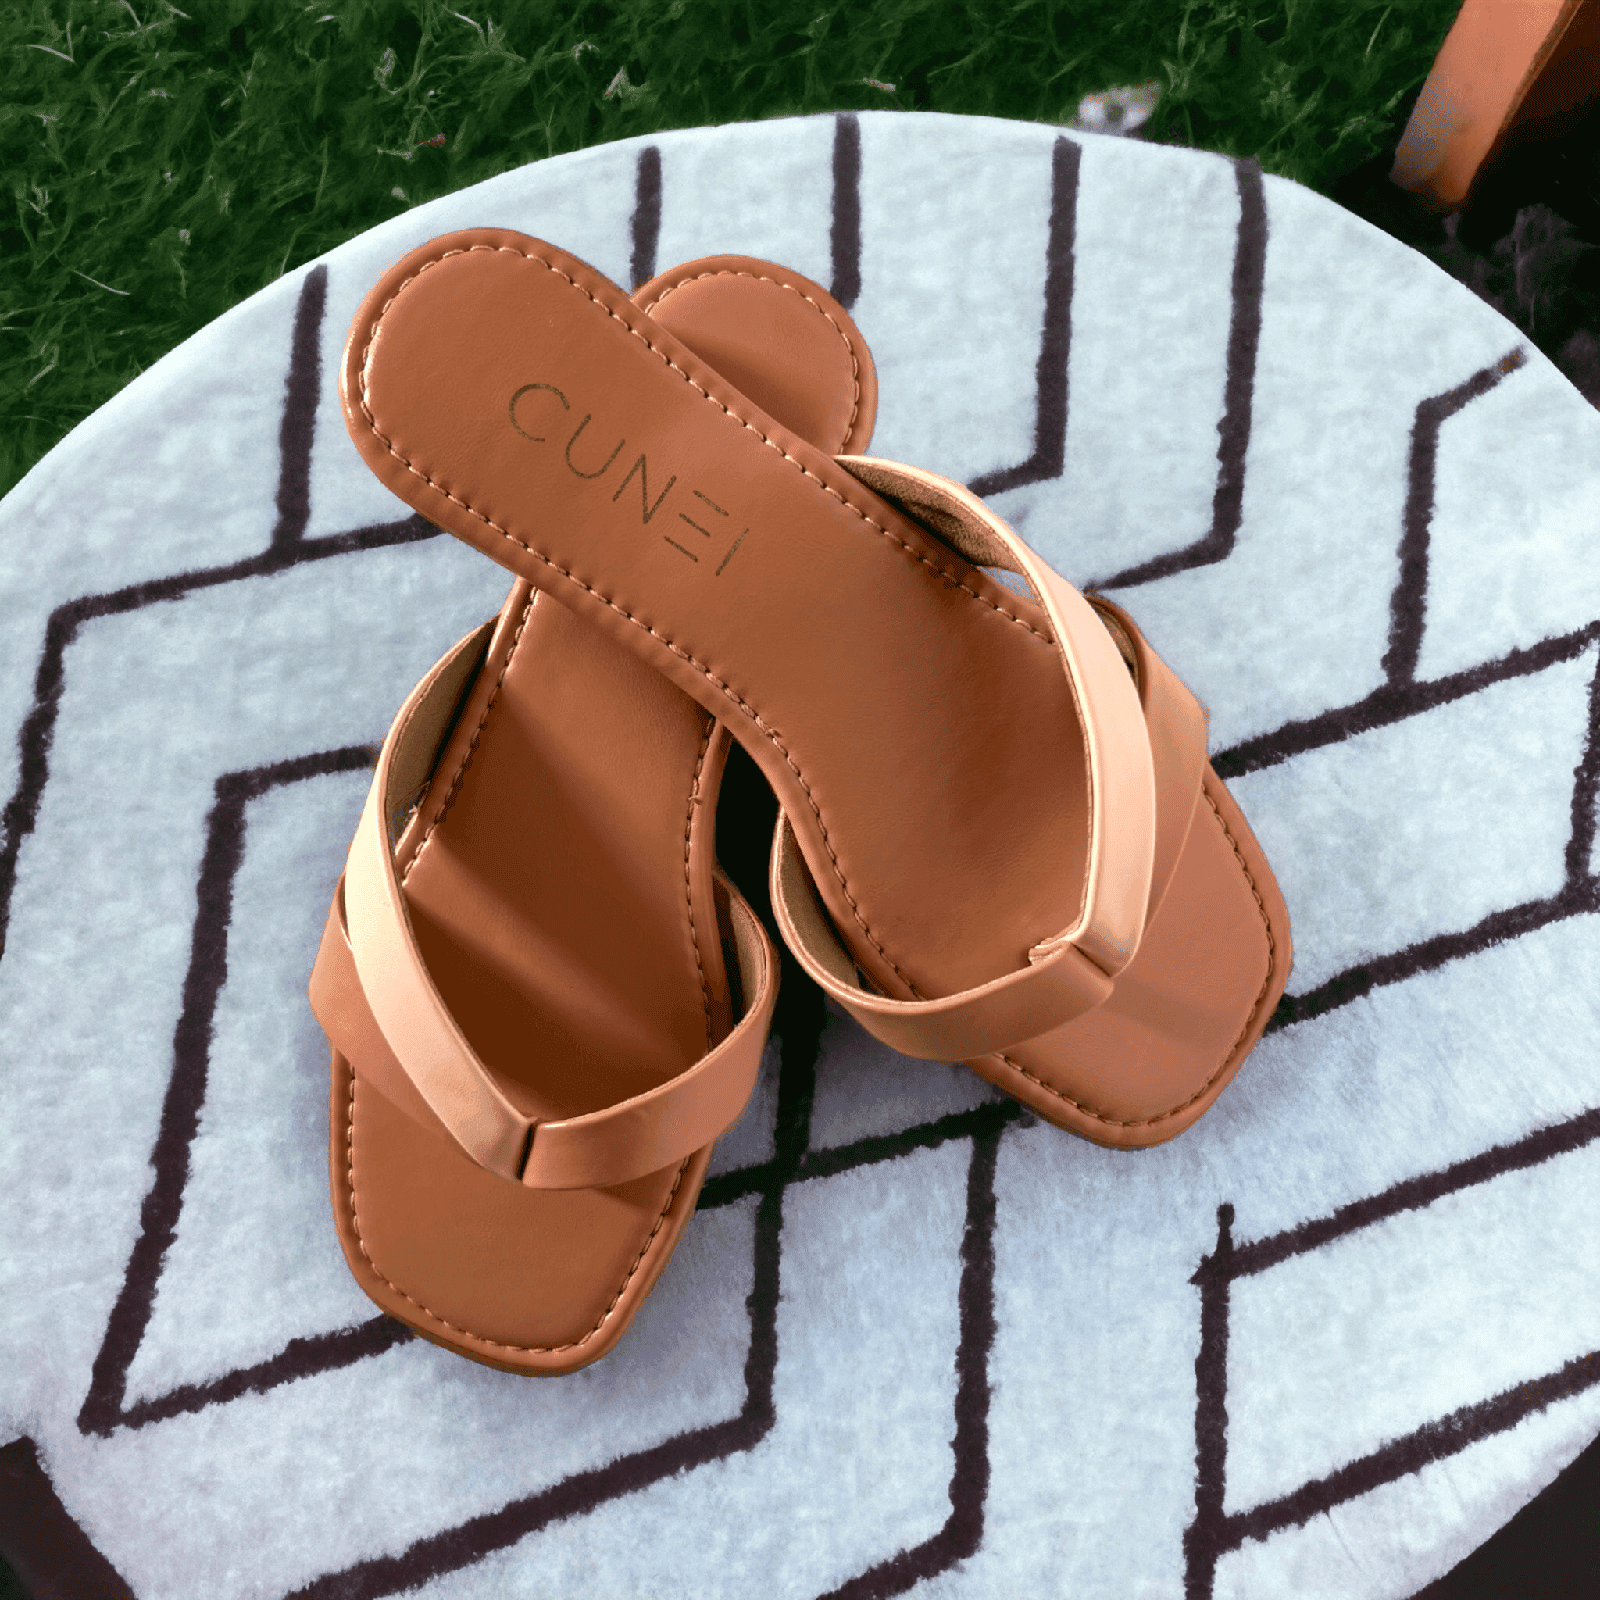 W Brand Sandals - Buy W Brand Sandals online in India